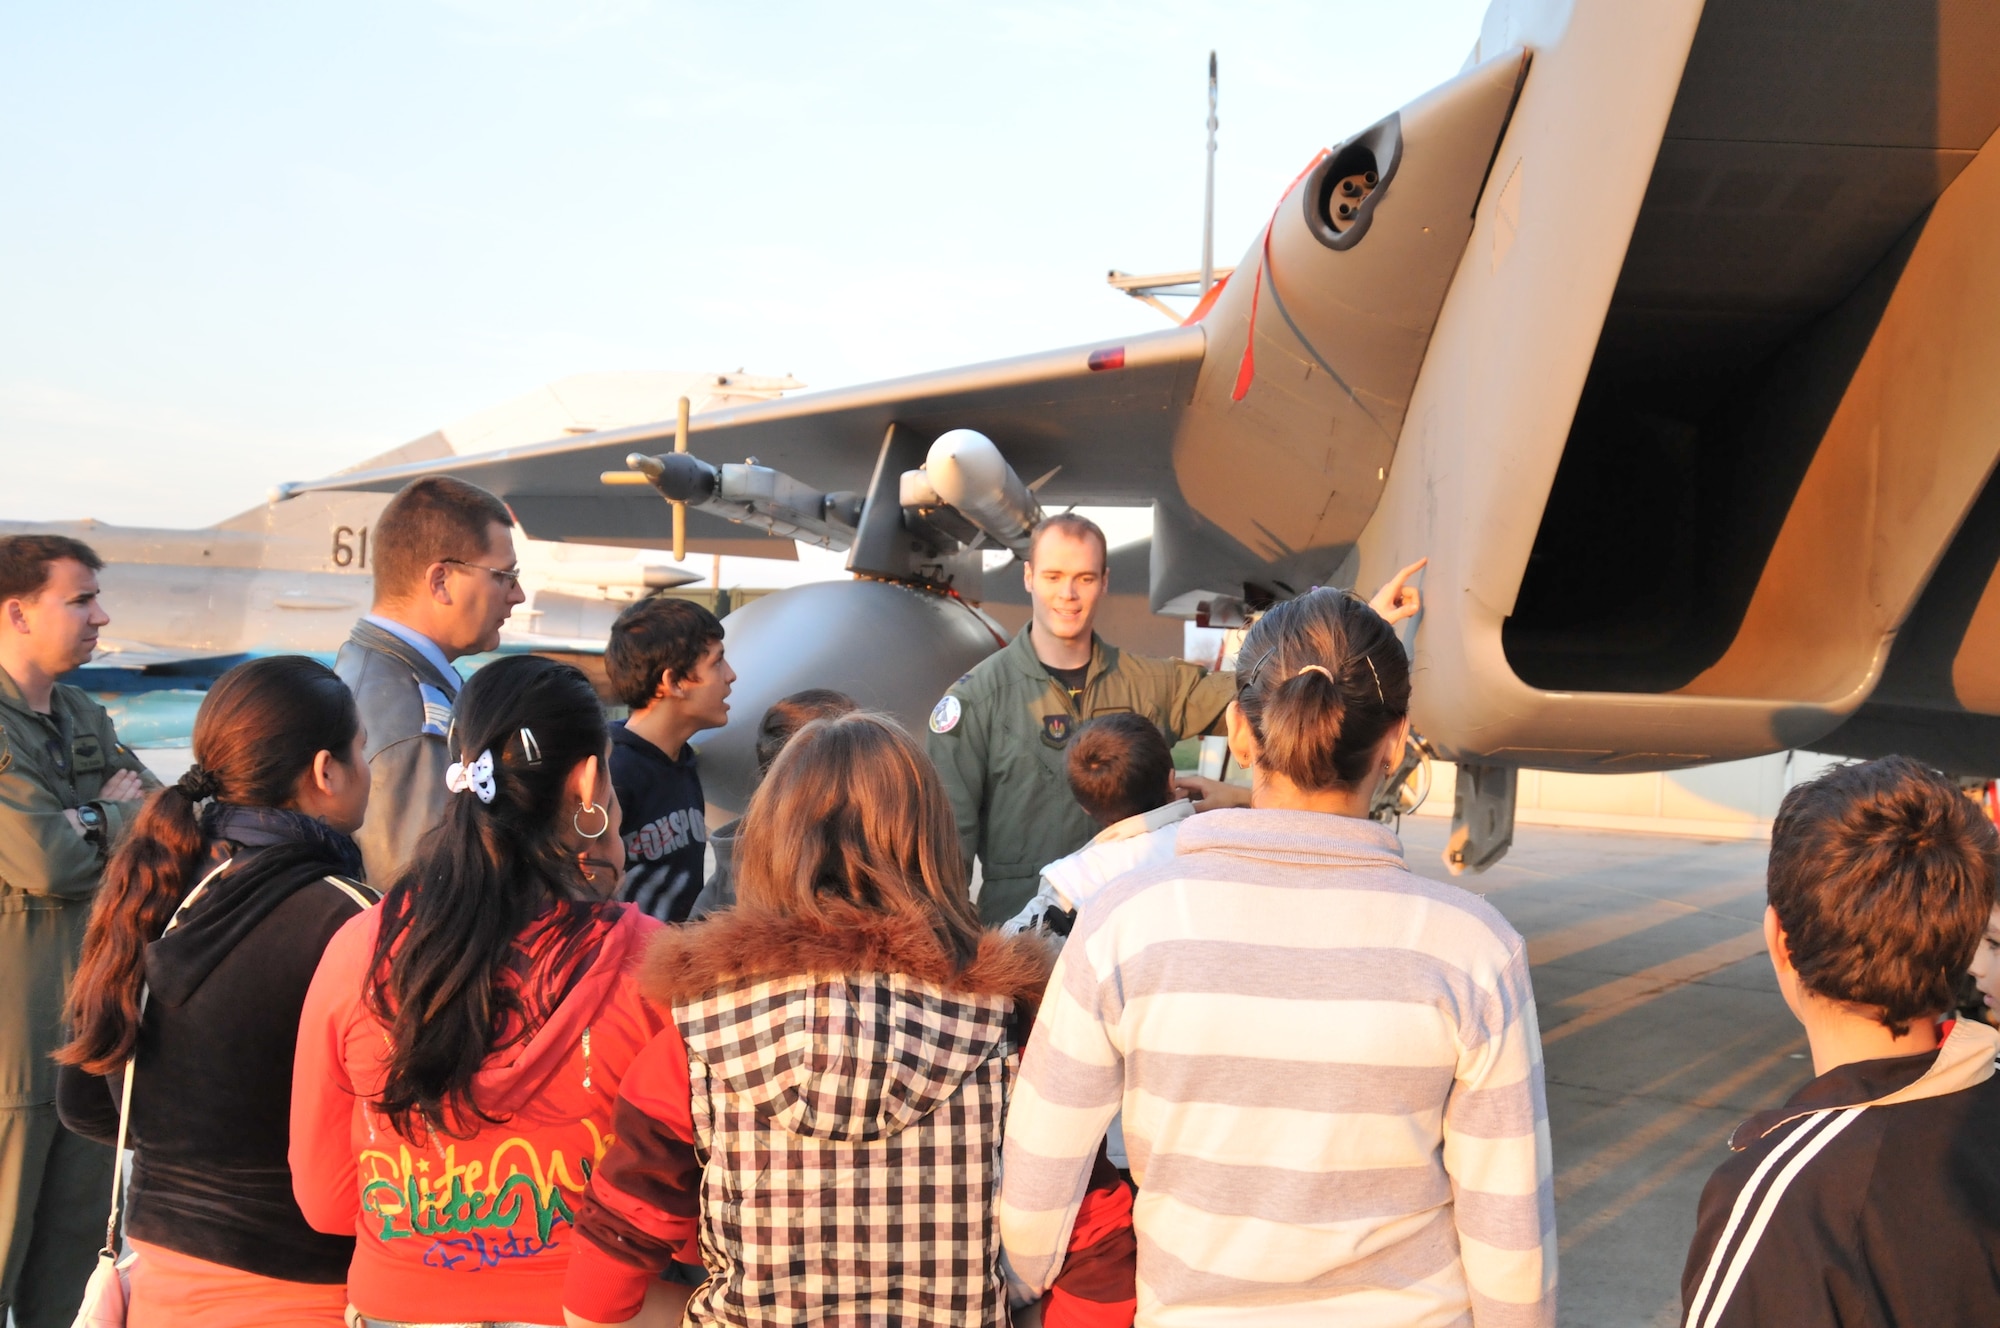 CAMPIA TURZII AIR BASE, Romania - Capt. Neils Barner, 493rd Fighter Squadron pilot, describes an F-15C Eagle to a group of Romanian school children  Nov. 5. The children visited from a local youth center where Airmen had volunteered to play games and perform repairs. (U.S. Air Force photo/Senior Airman David Dobrydney)